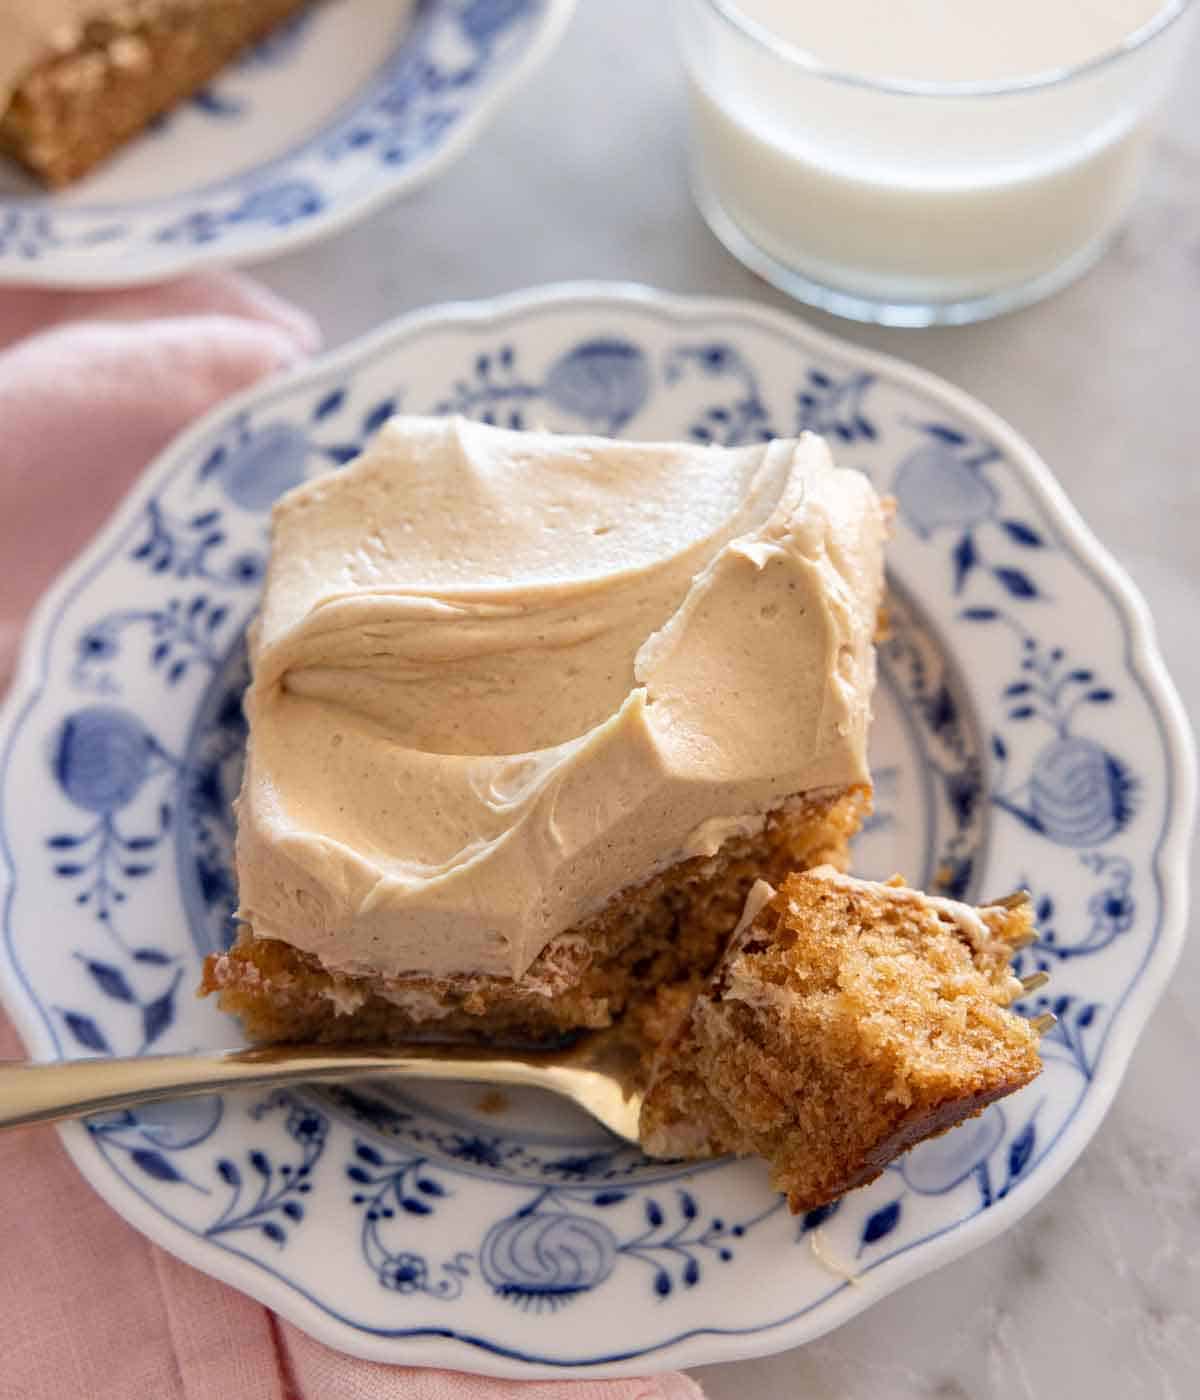 A plate of peanut butter cake with a bite on a fork.